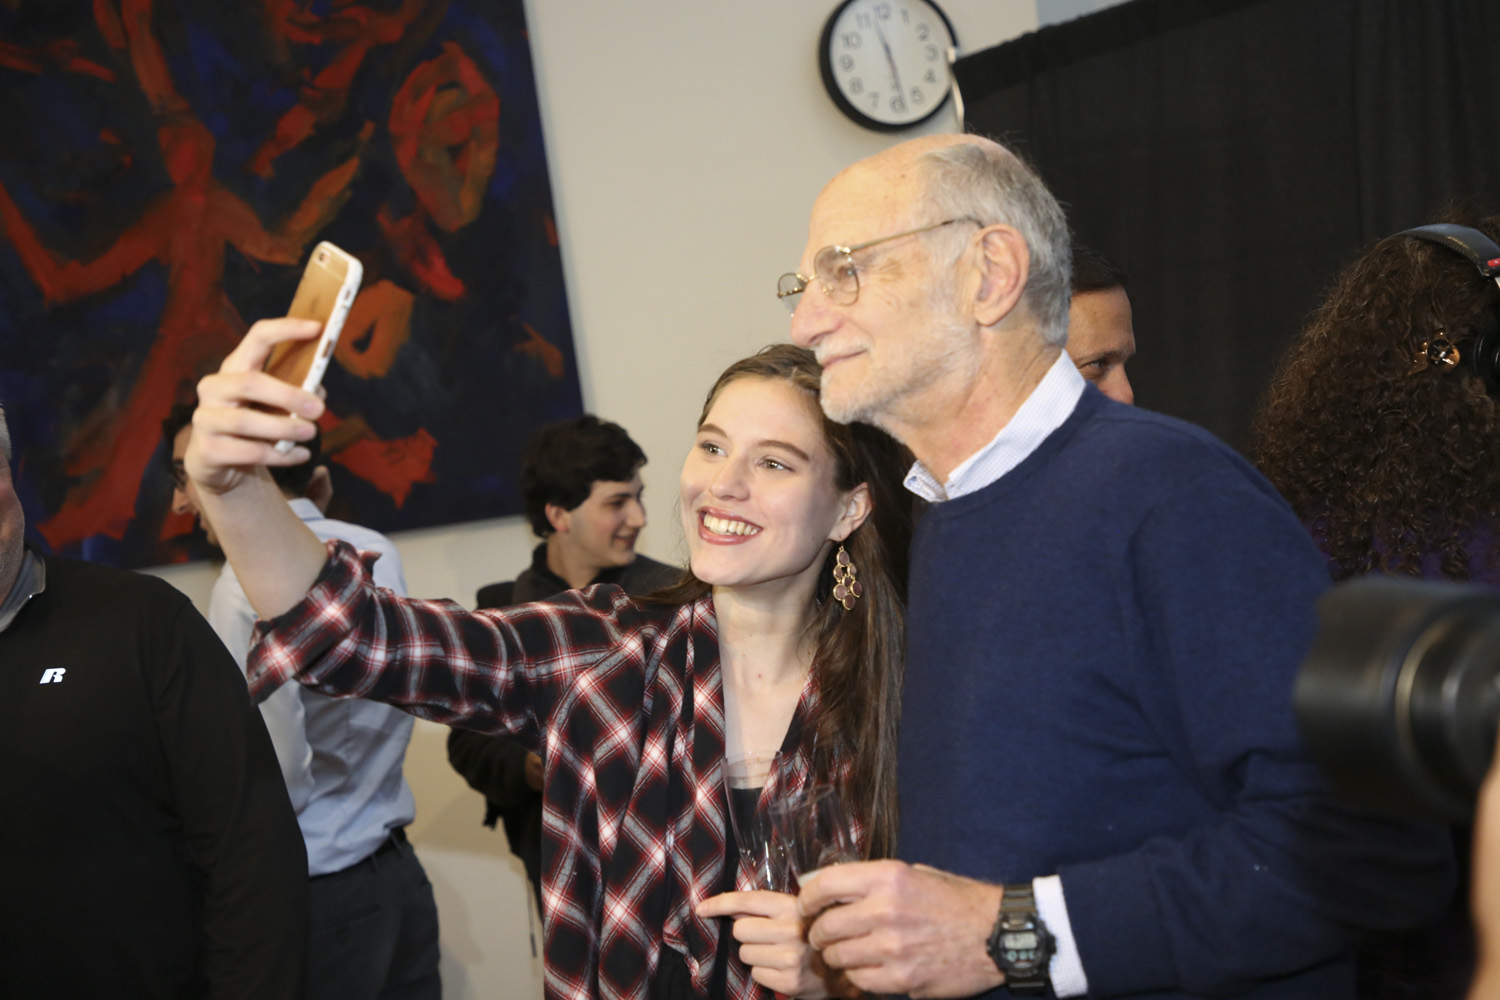 michael rosbash takes a selfie with a student